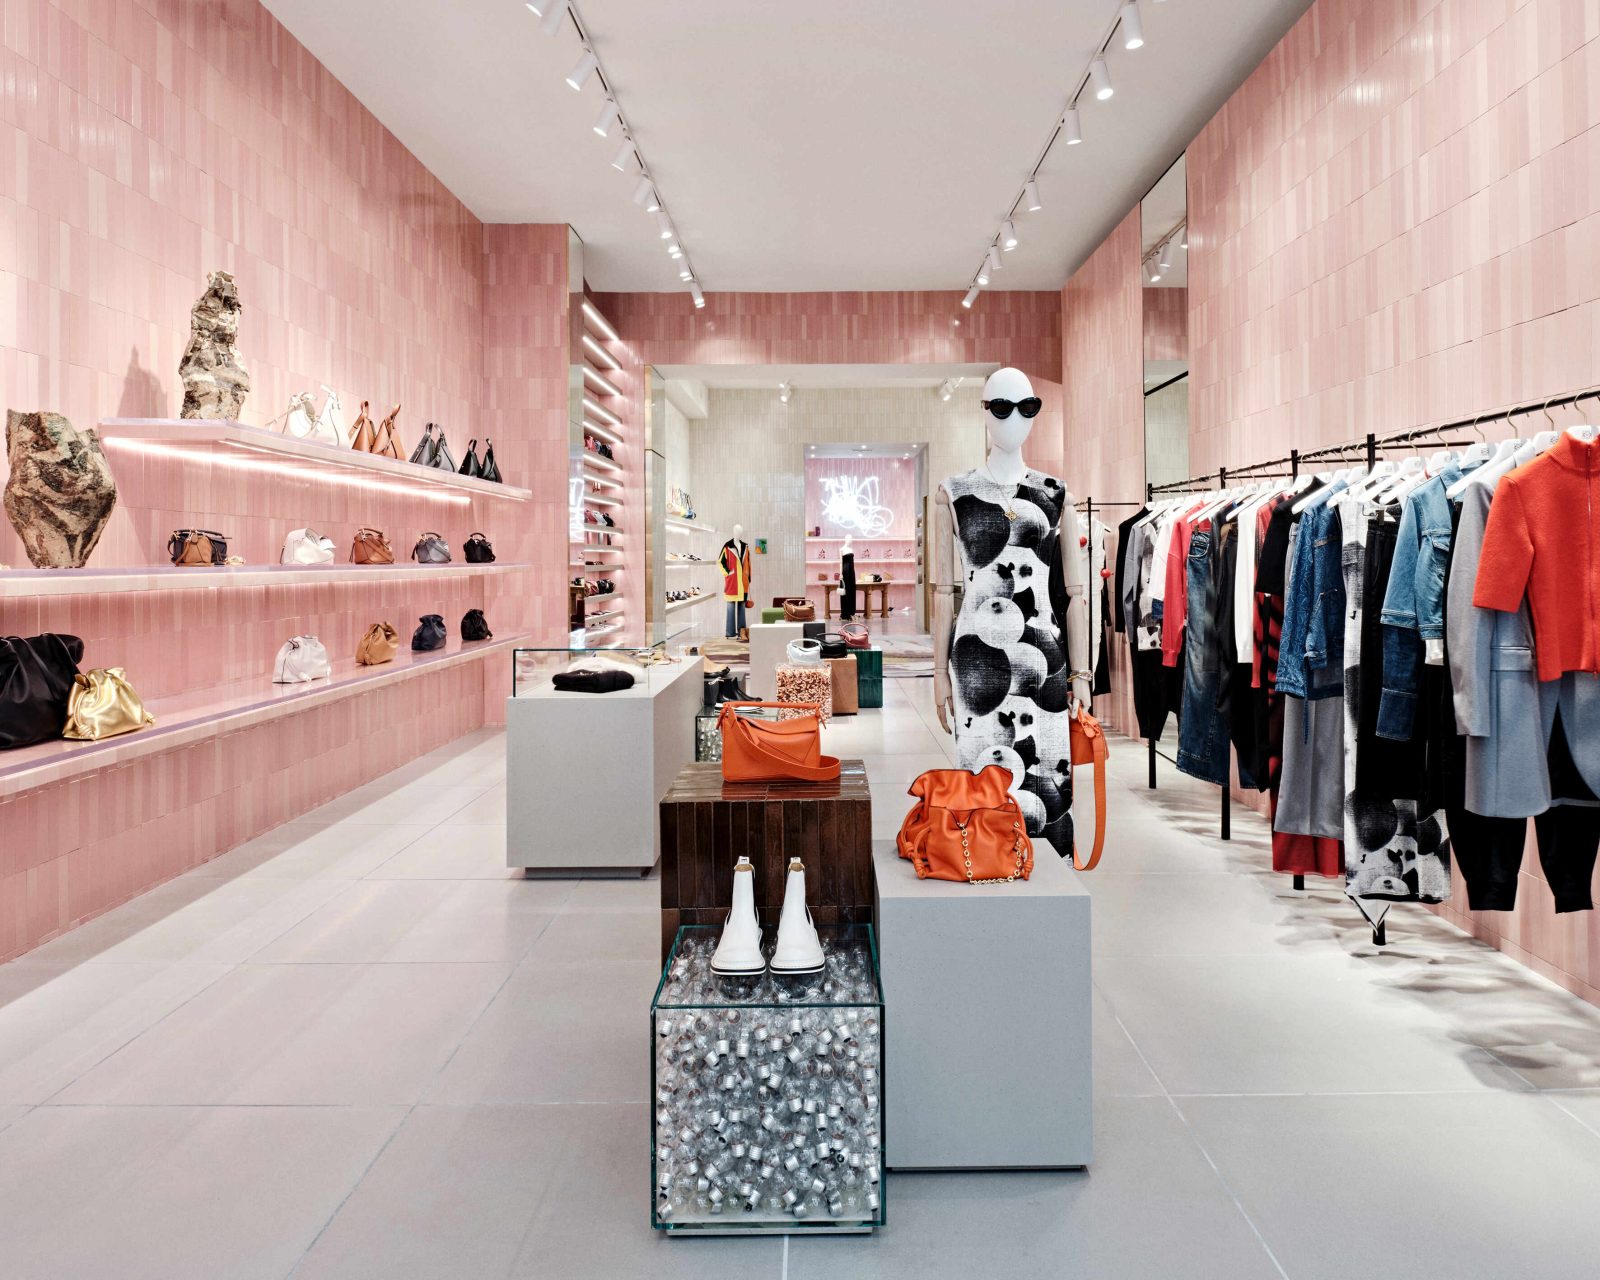 Retail, Inside the new Gucci store in SoHo, New York [PHOTOS]